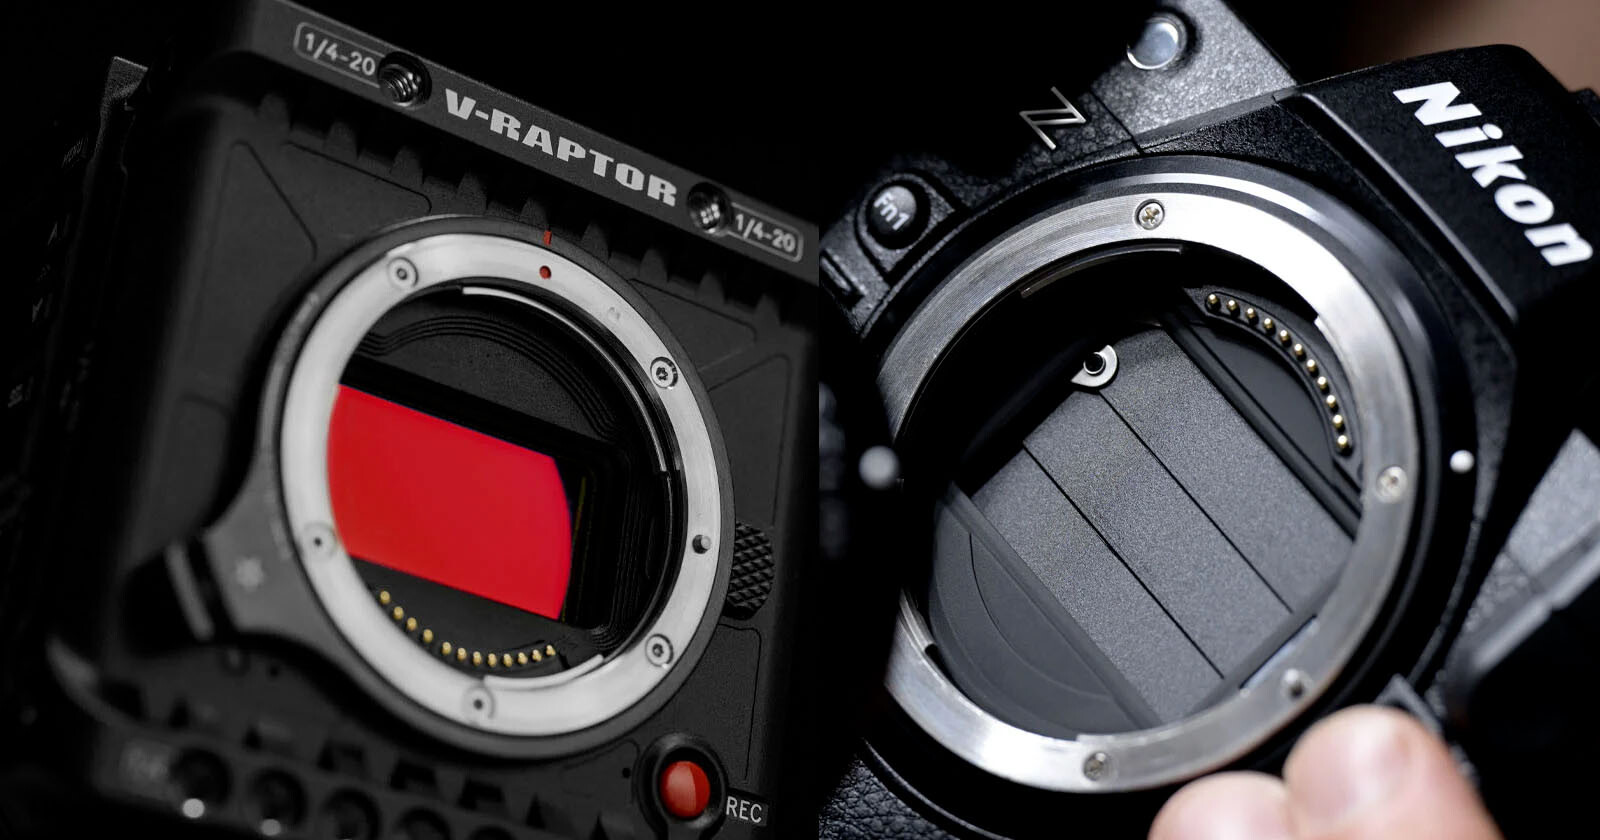 REDs Lawsuit Against Nikon Dismissed: Z9 Gets to Keep Compressed RAW